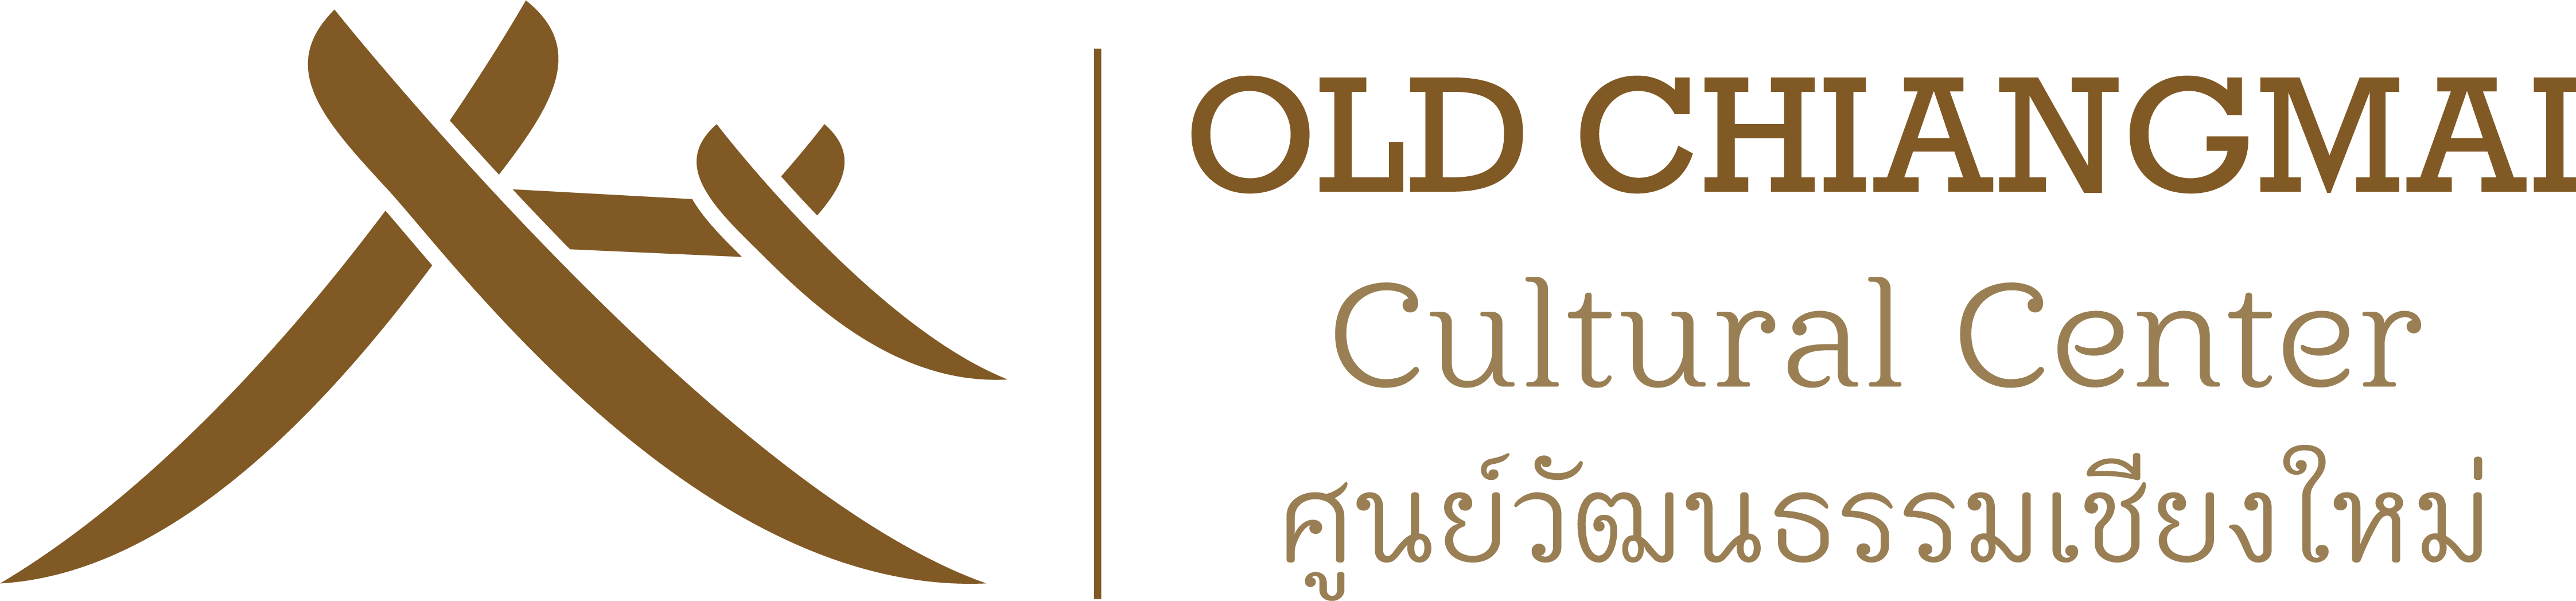 Old Chiangmai Cultural Center